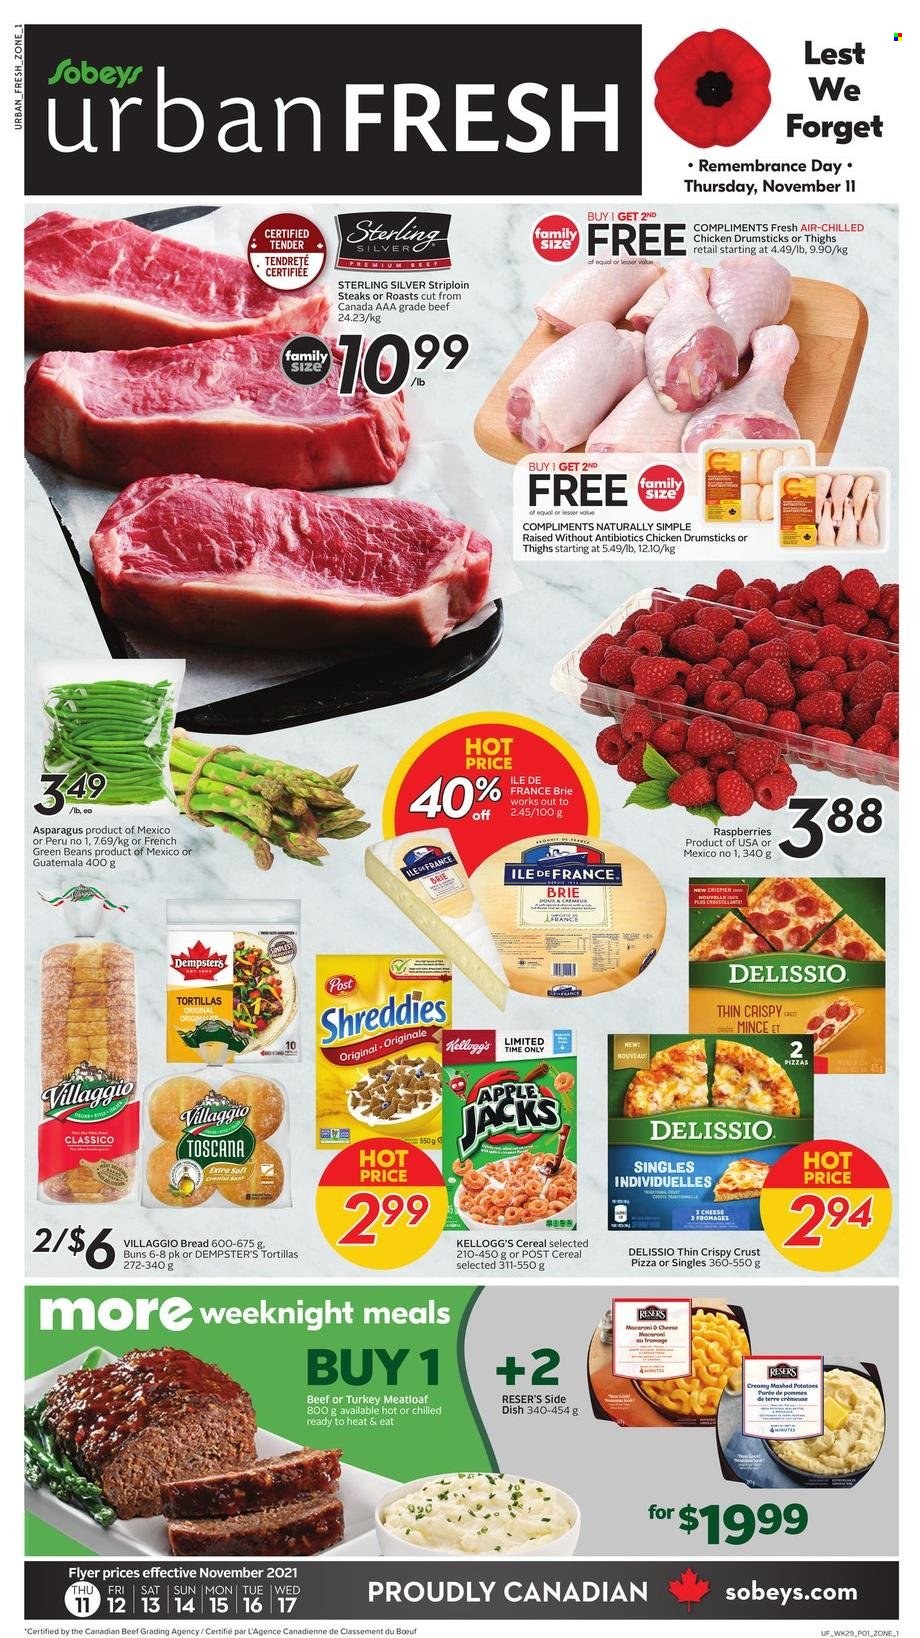 thumbnail - Sobeys Urban Fresh Flyer - November 11, 2021 - November 17, 2021 - Sales products - bread, tortillas, buns, asparagus, beans, green beans, pizza, meatloaf, brie, Kellogg's, cereals, Classico, chicken drumsticks, chicken, beef meat, striploin steak, steak. Page 1.